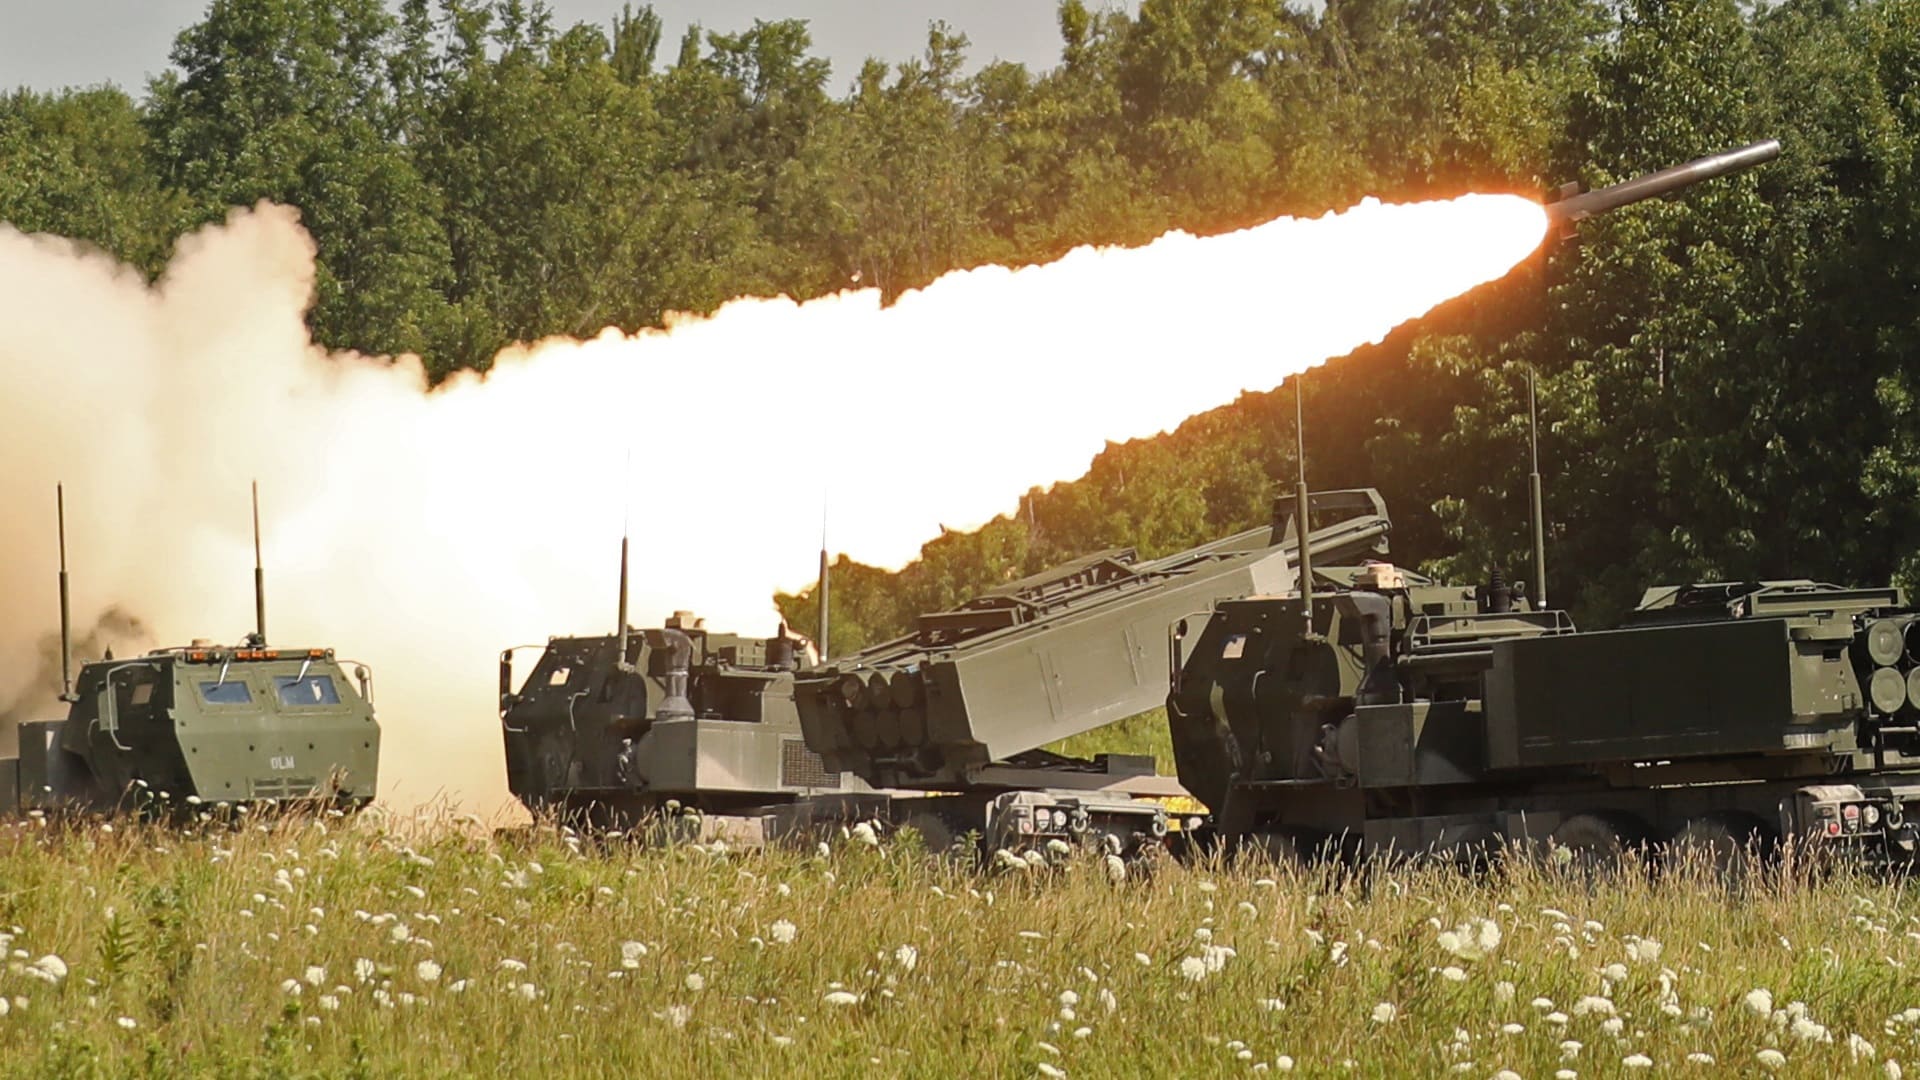 197 Field Artillery Regiment of New Hampshire fires rockets at Fort Drum in preparation for an upcoming deployment